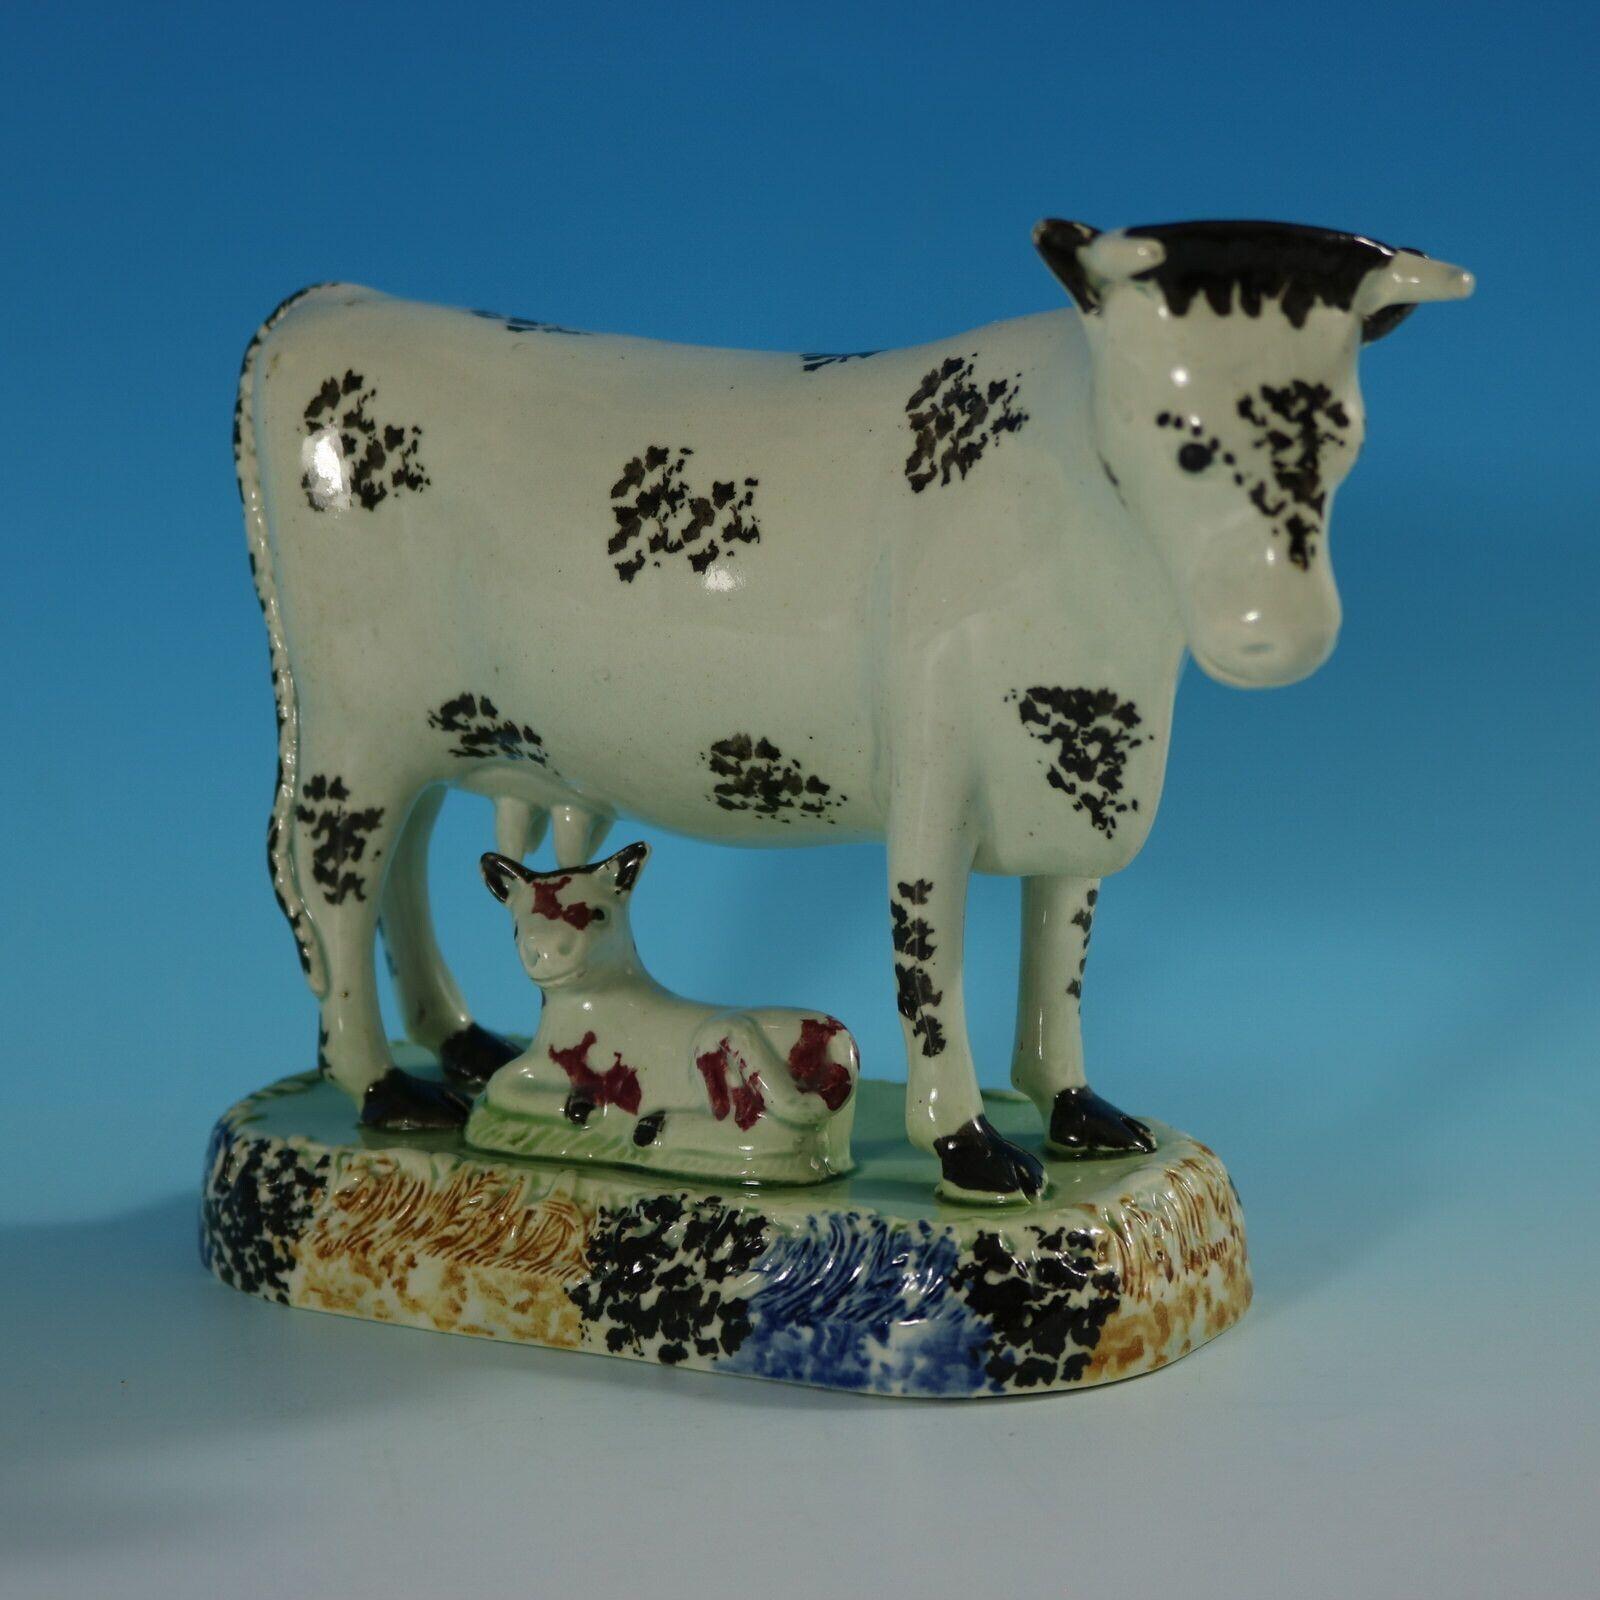 Staffordshire Yorkshire Pottery Prattware figure which features a cow with a recumbent calf, stood on a rectangular base, with grassy detail. Speckled blue, orange and black around the base.